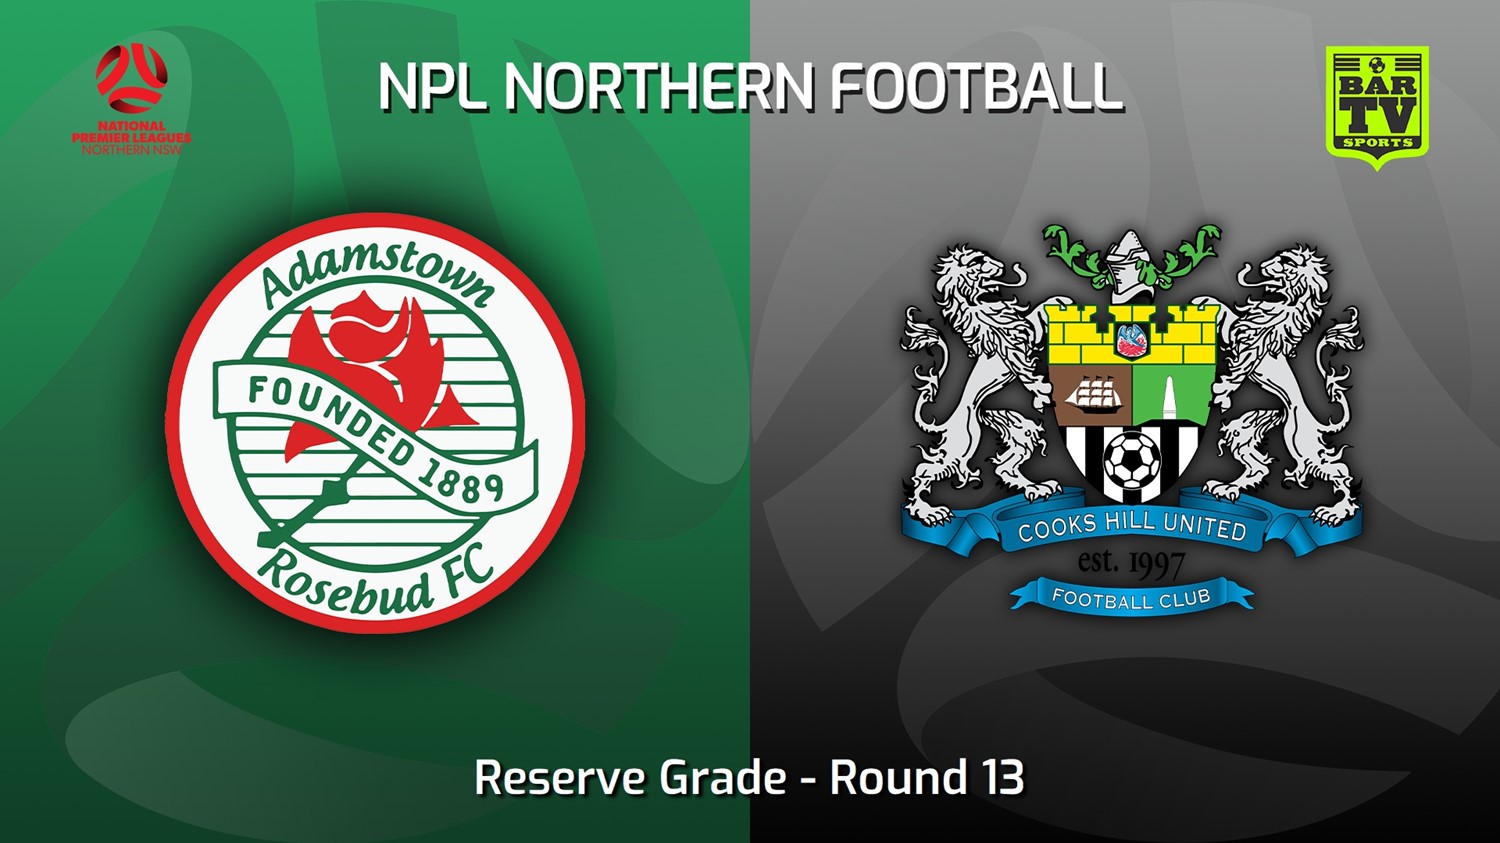 230729-NNSW NPLM Res Round 13 - Adamstown Rosebud FC Res v Cooks Hill United FC (Res) Minigame Slate Image